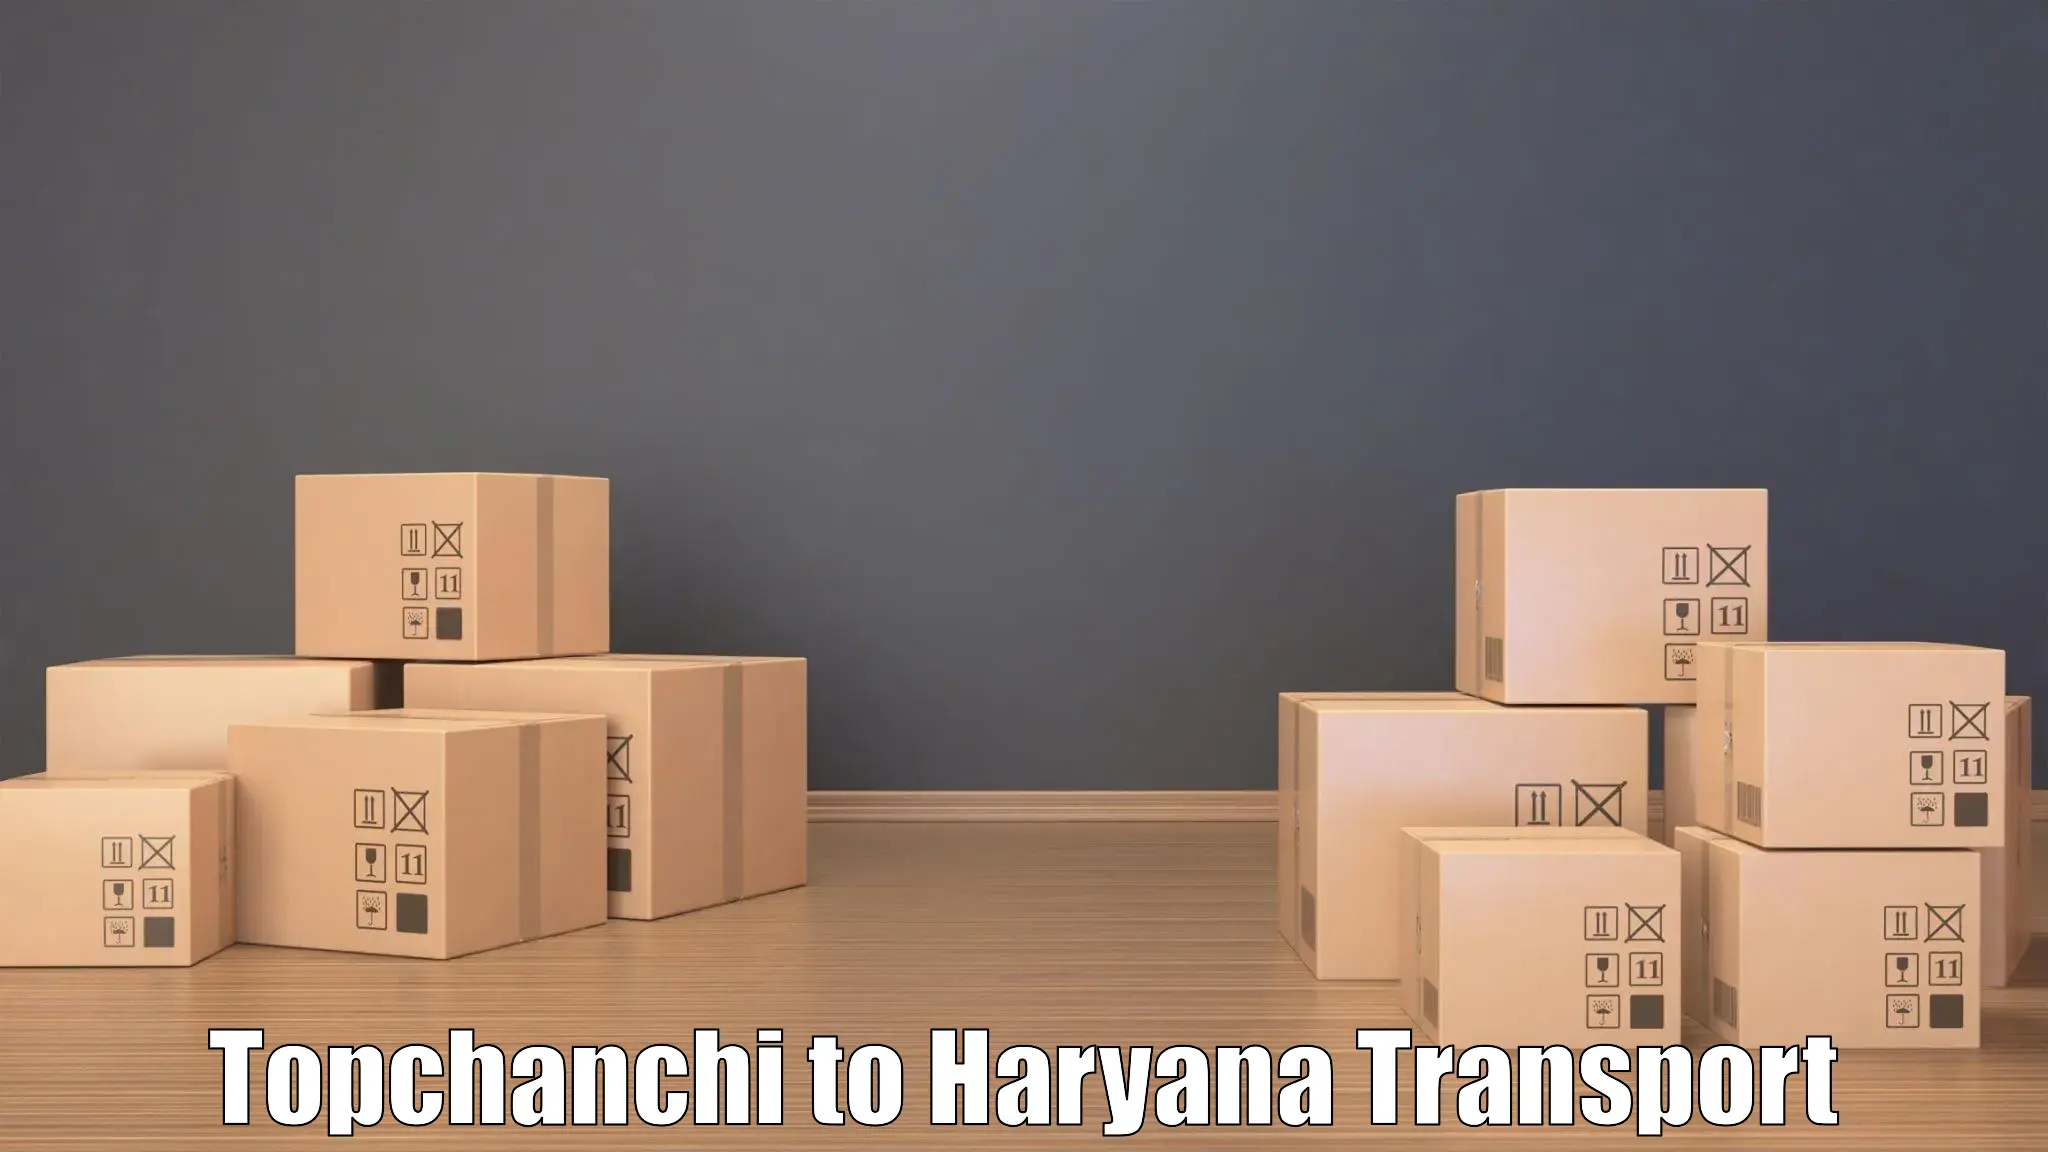 Land transport services Topchanchi to NCR Haryana